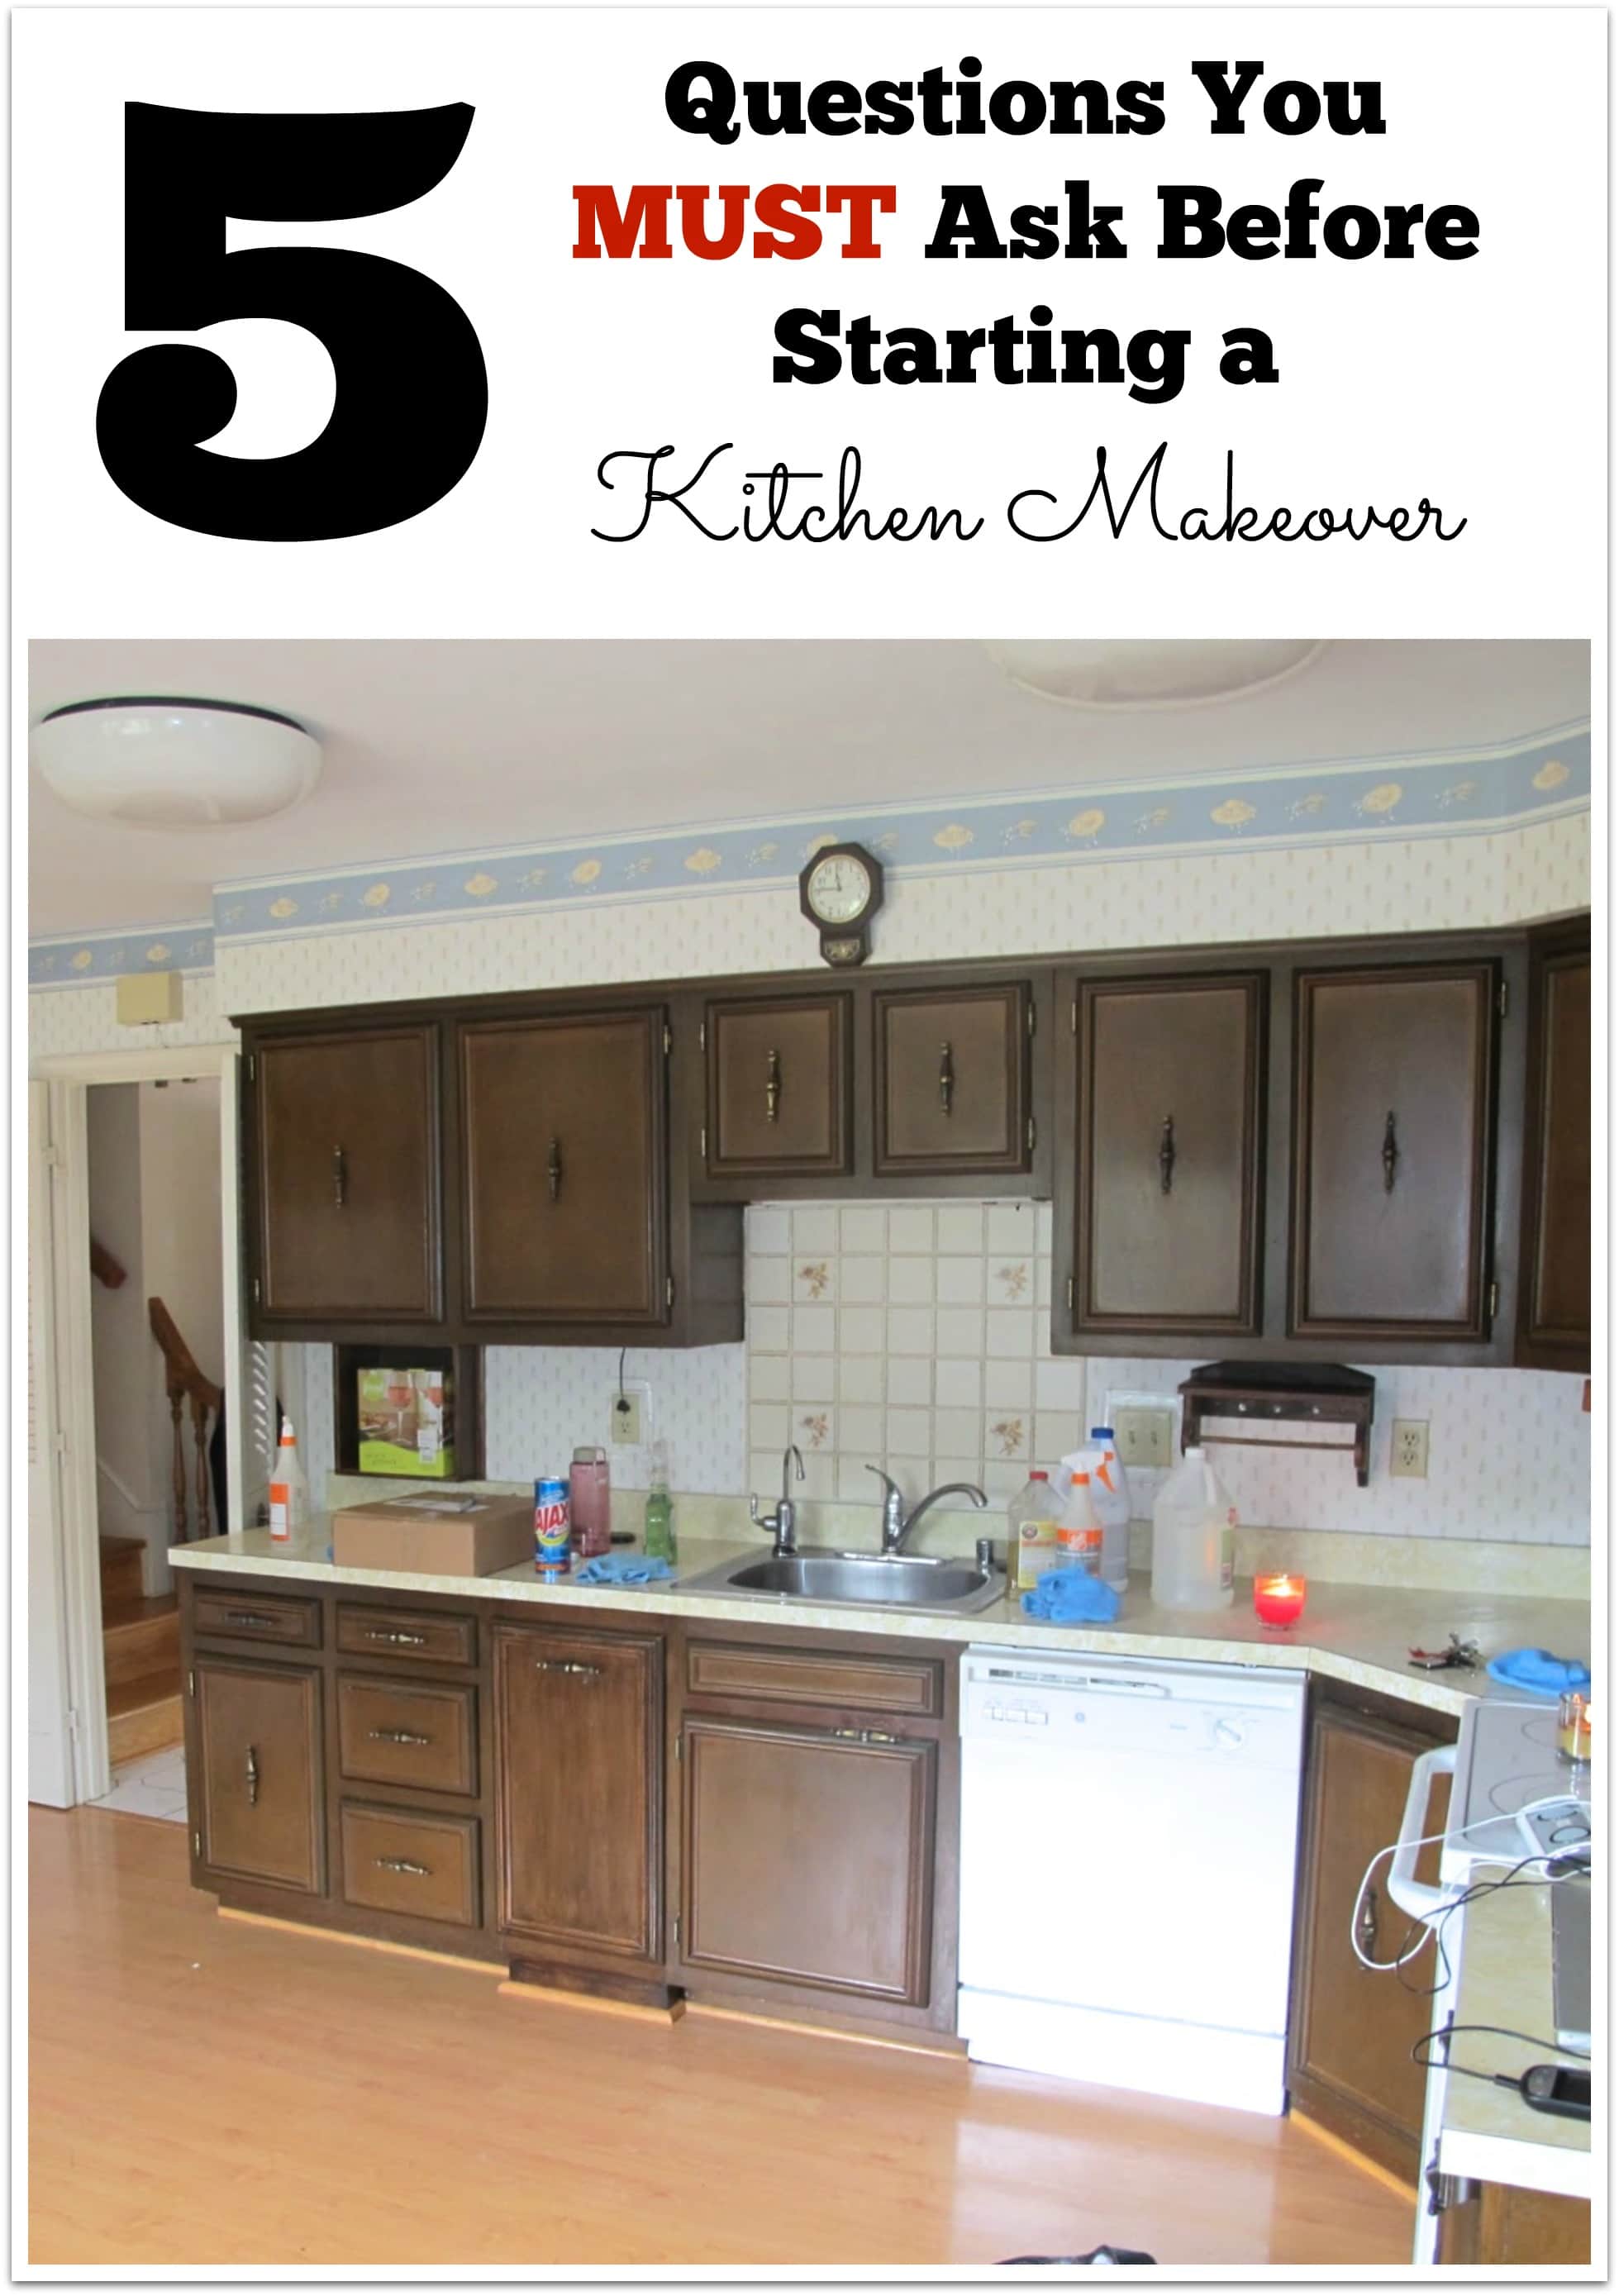 5 Questions You MUST Ask Before Starting a Kitchen Makeover - Thrift Diving Blog